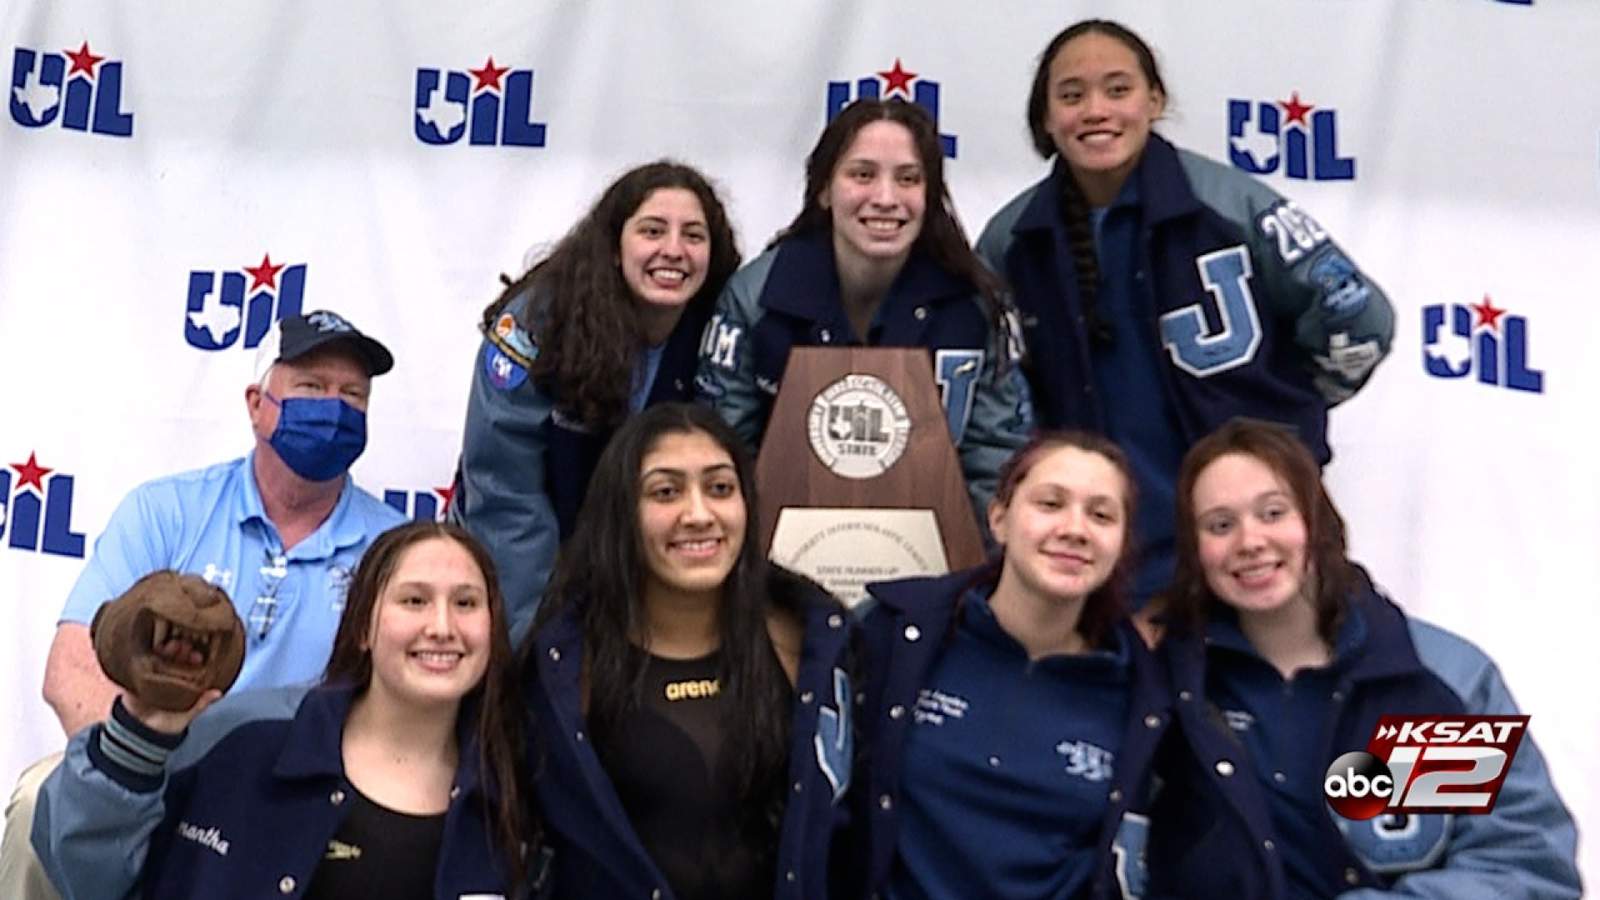 HIGHLIGHTS: Johnson girls set state record, take second overall at UIL Girls 6A State